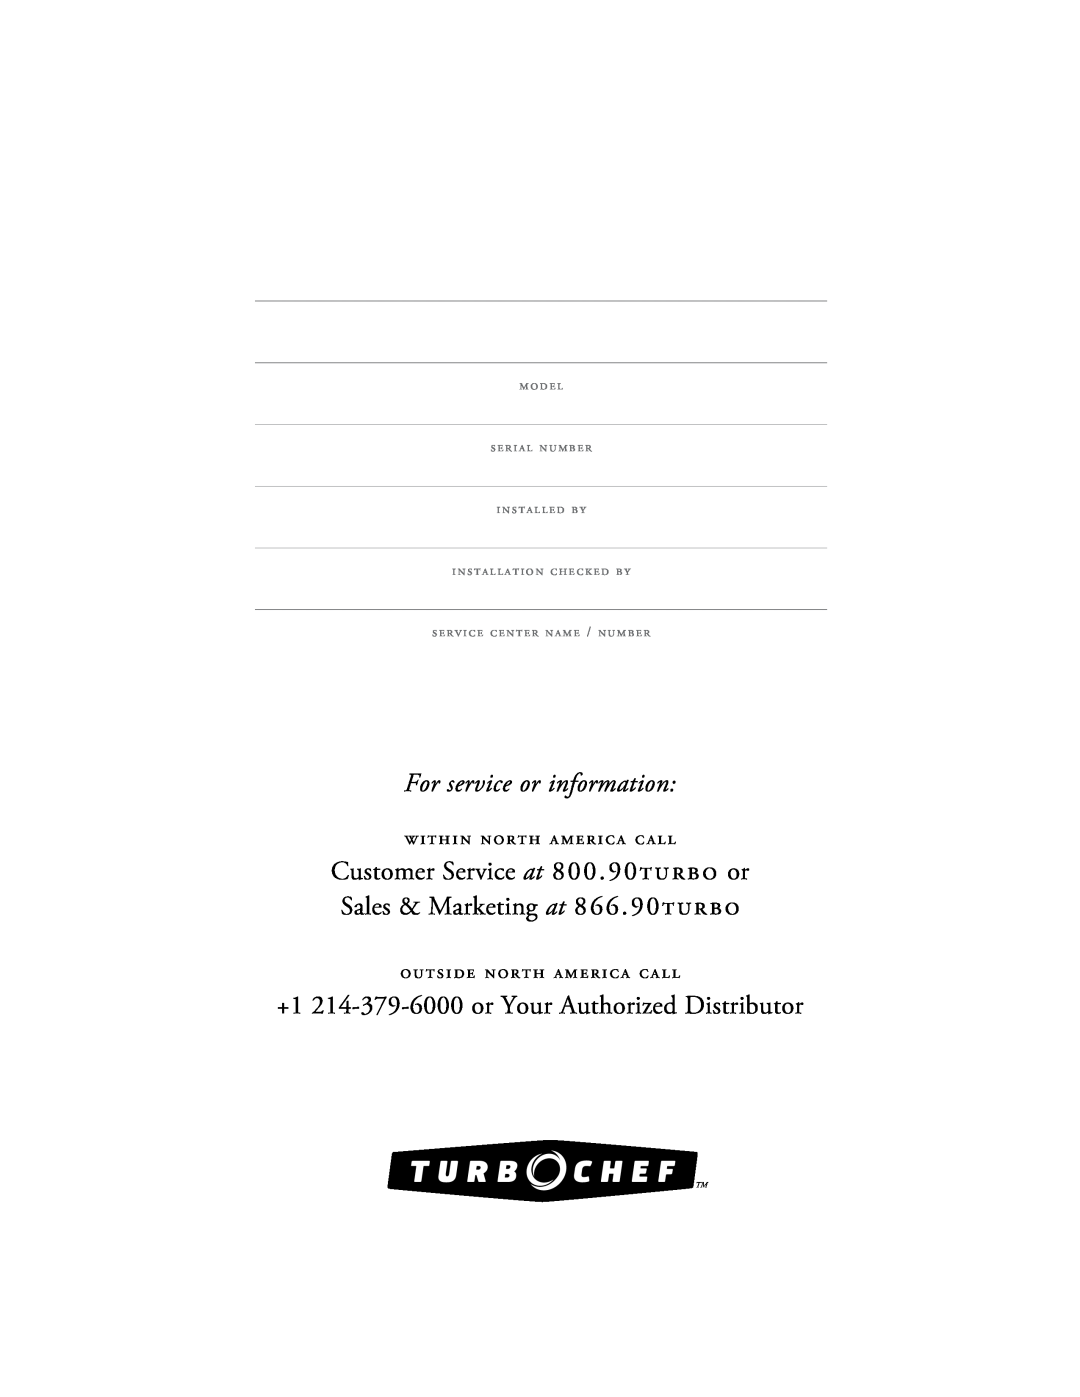 Turbo Chef Technologies Tornado 2 owner manual For service or information, +1 214-379-6000 or Your Authorized Distributor 